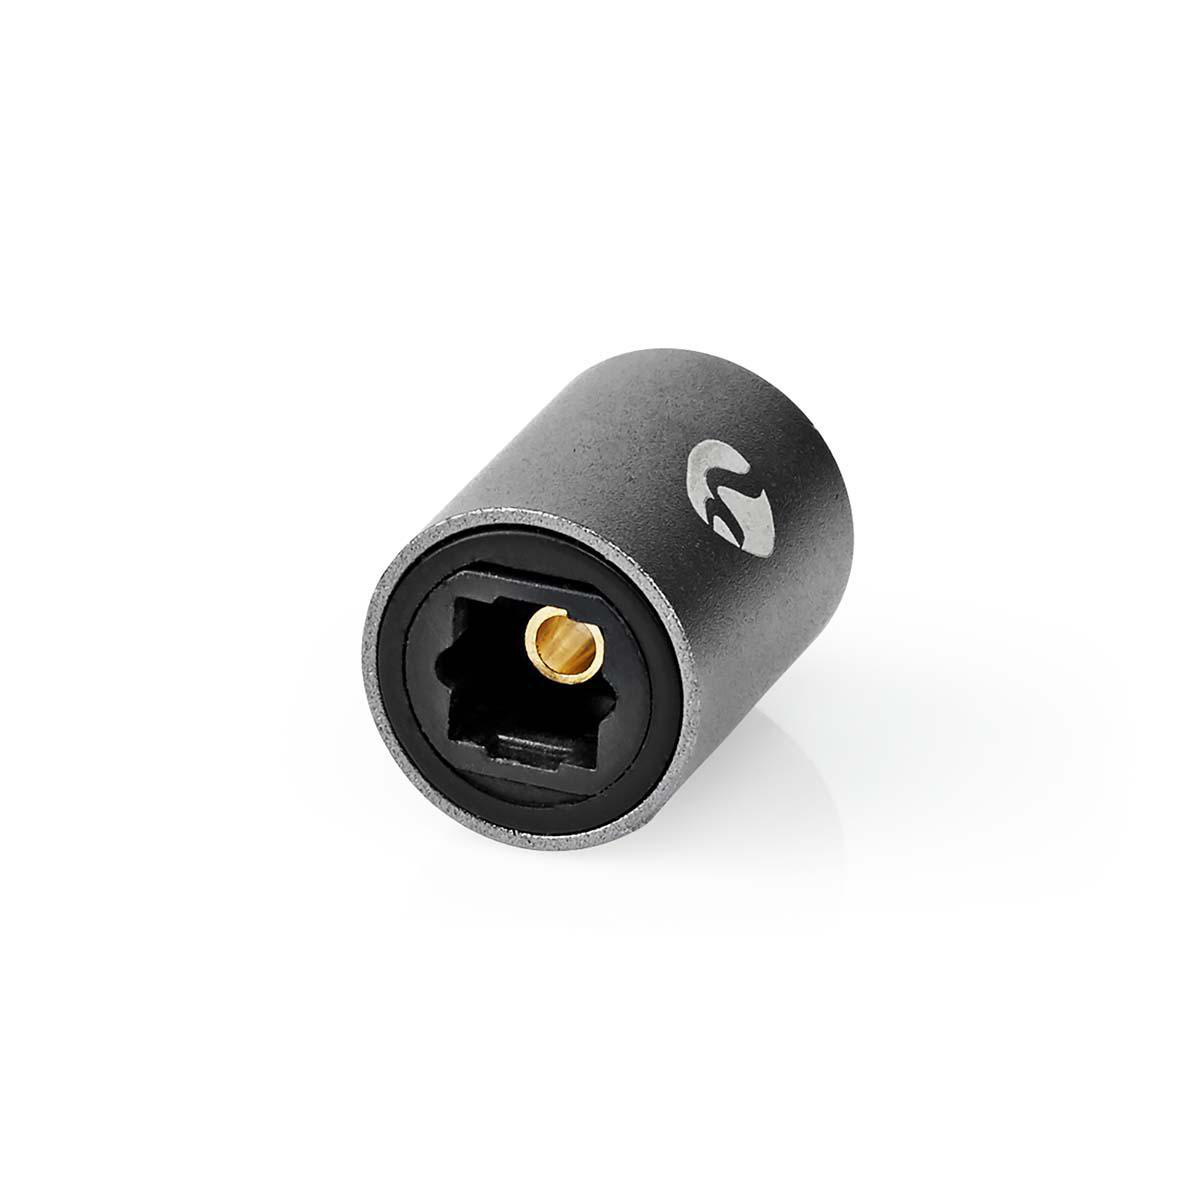 NEDIS Adapter Toslink CATB25950GY